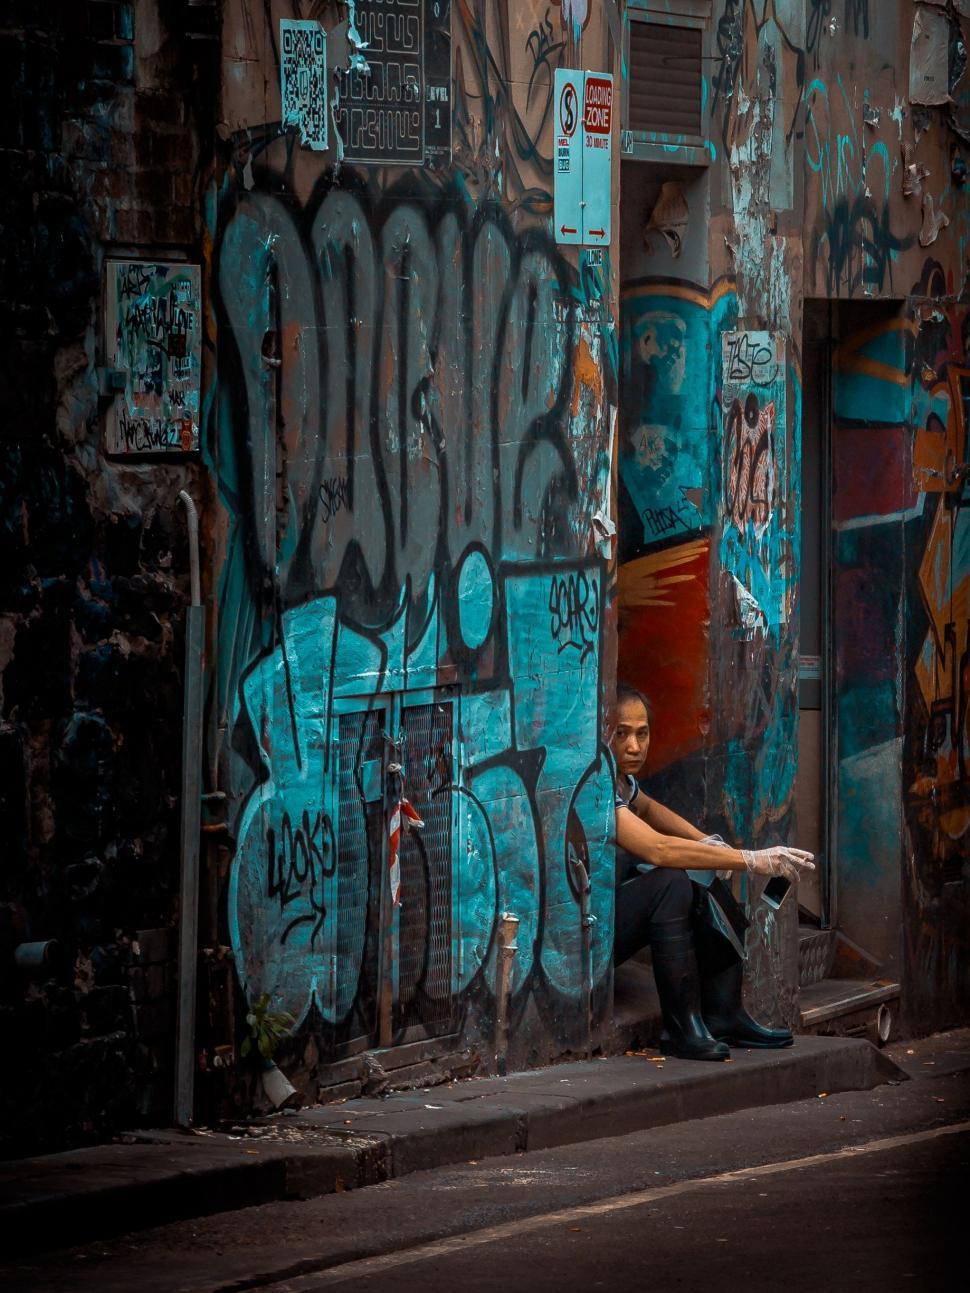 Free Image of Man Sitting on Side of Graffiti-Covered Building 